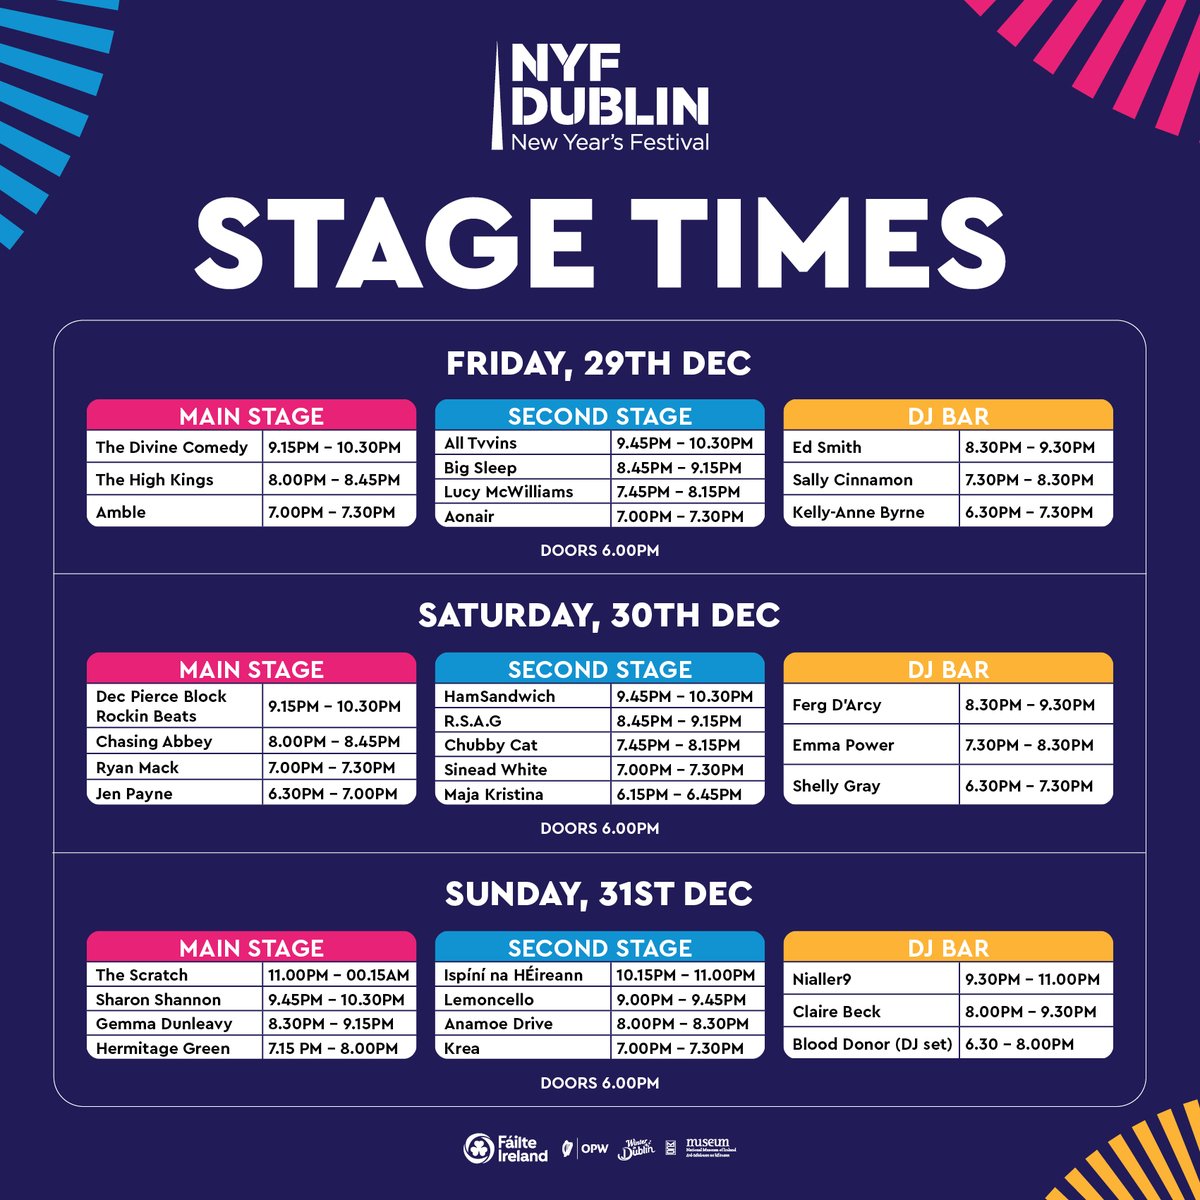 #NYFDublin Collins Barracks stage times maps are here! 🎉 Navigate your way through with ease. Plan your journey to the hottest stages, foodie havens, and hidden gems. ✨ #TheOnlyPlaceToBe #NYFDublin